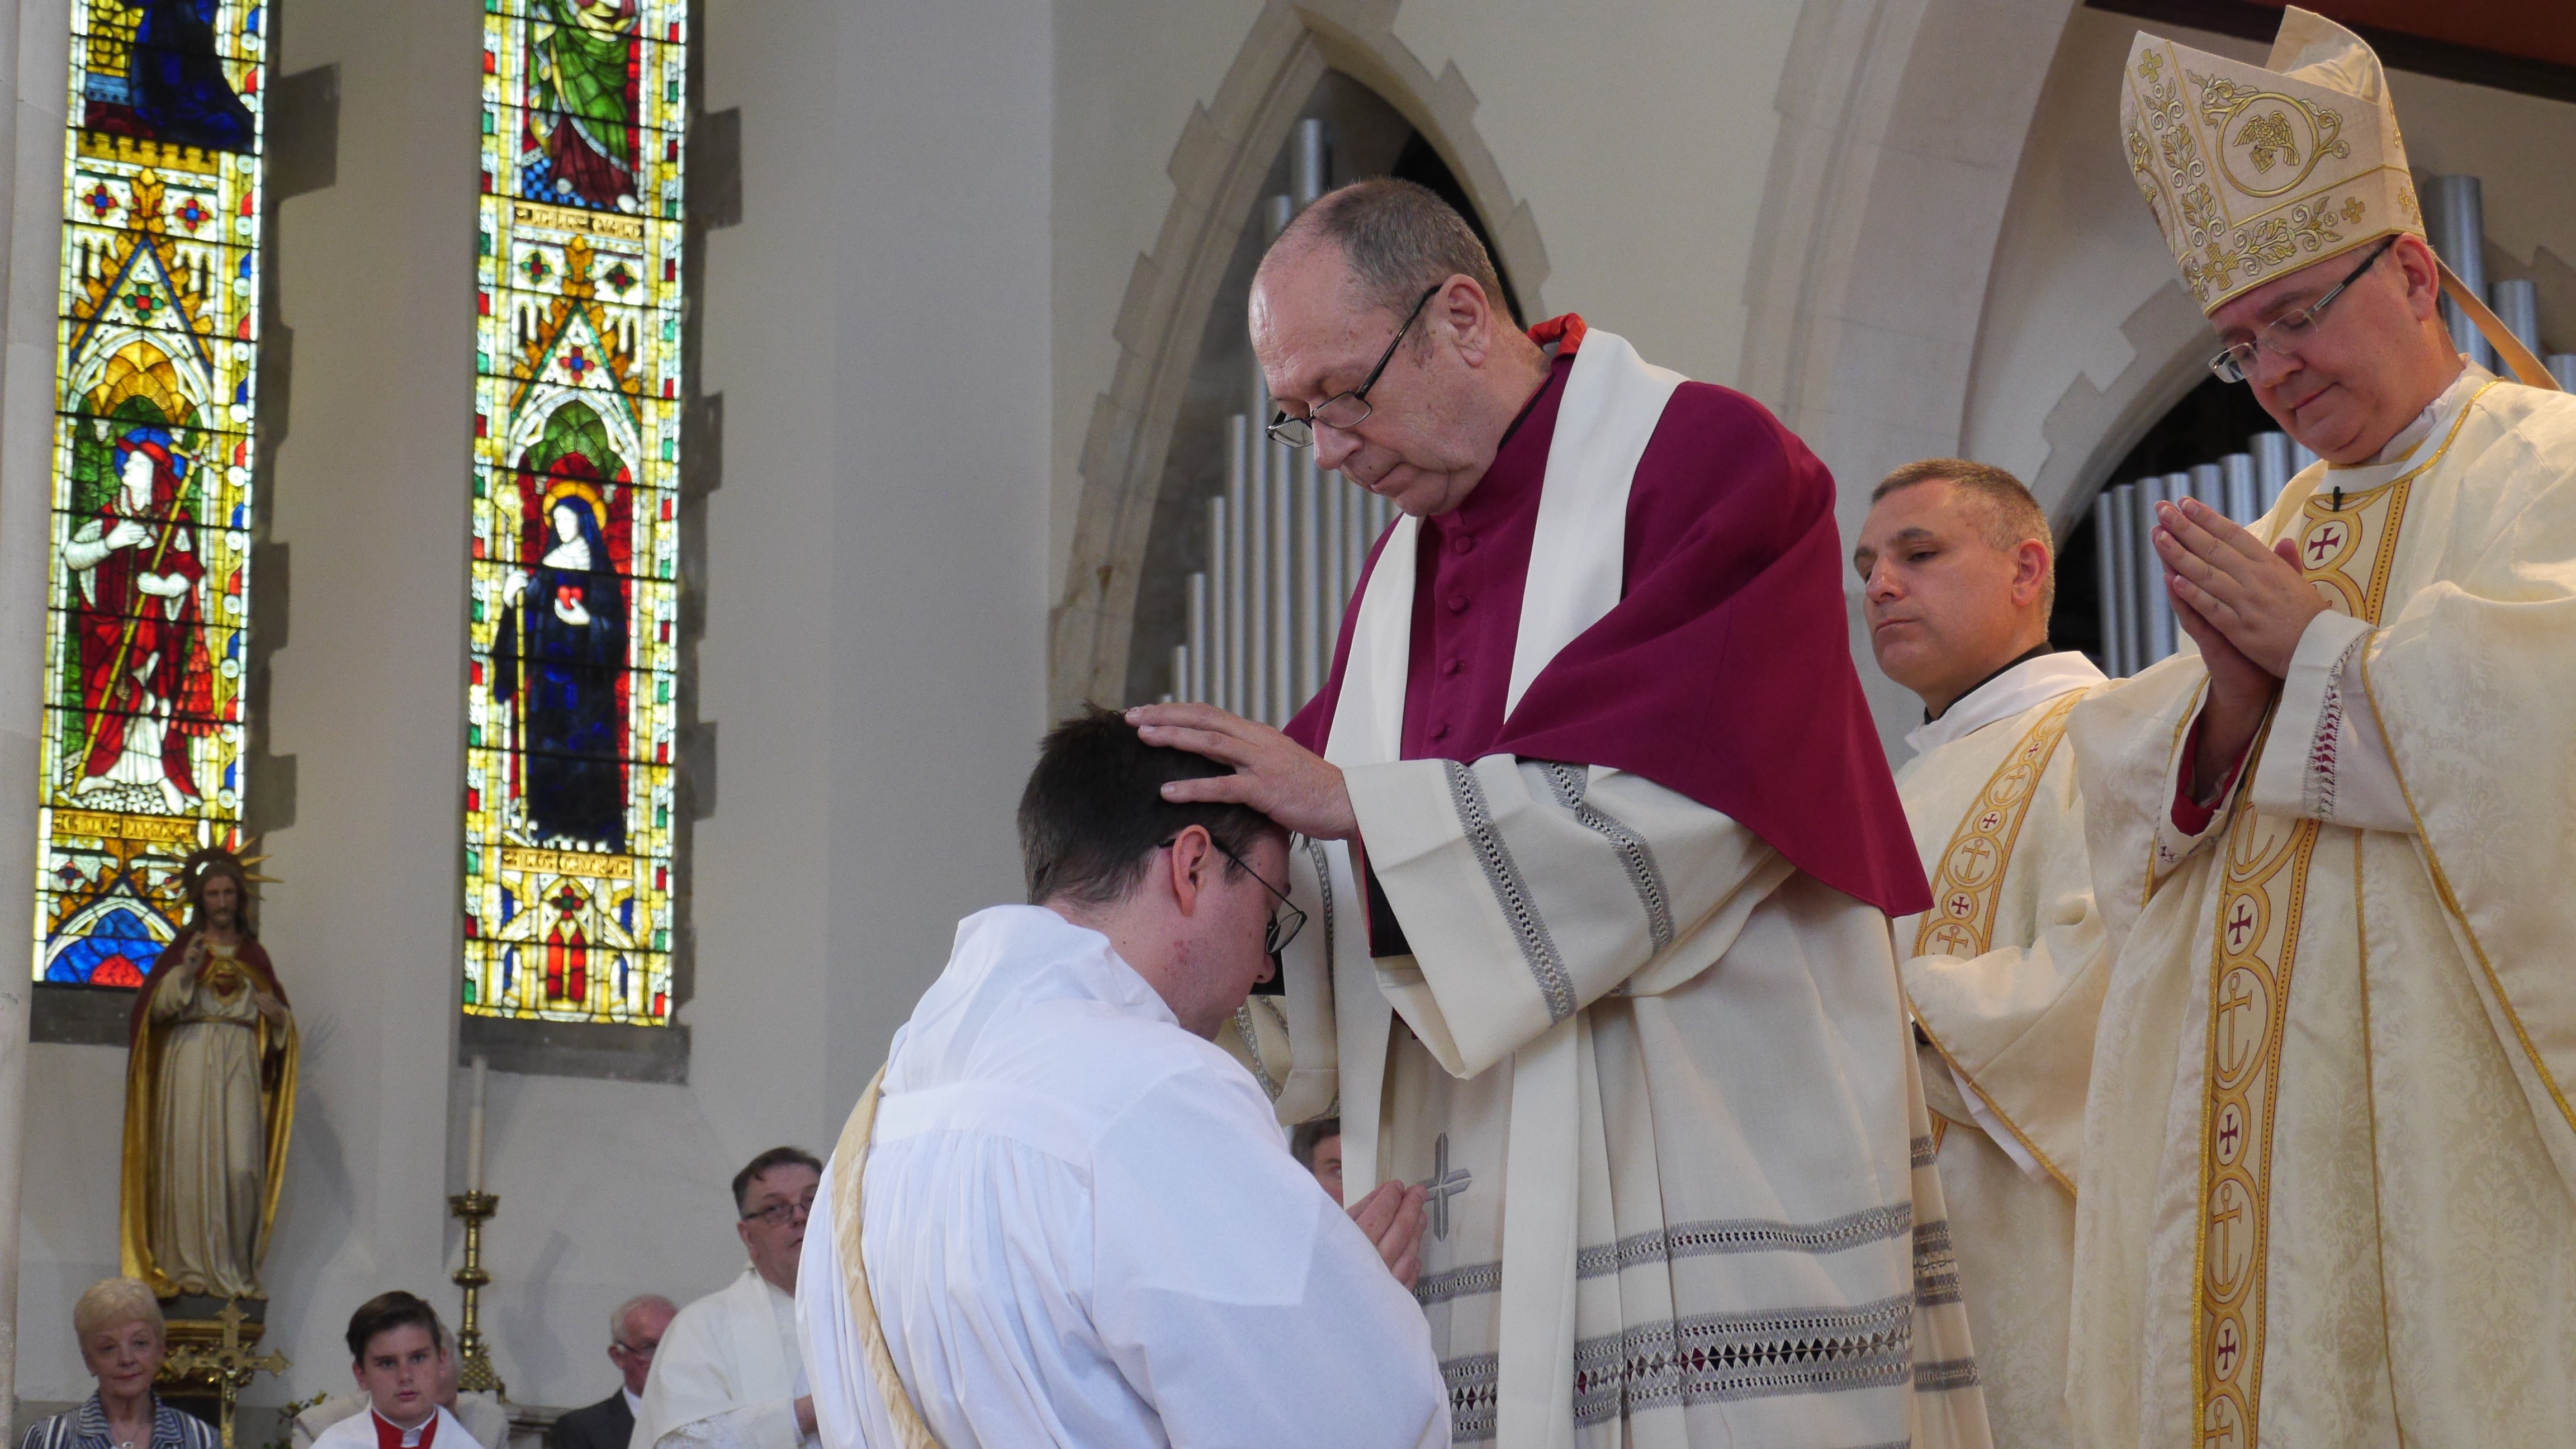 As is tradition all priest present at the Ordination place their hands on Fr James's head.